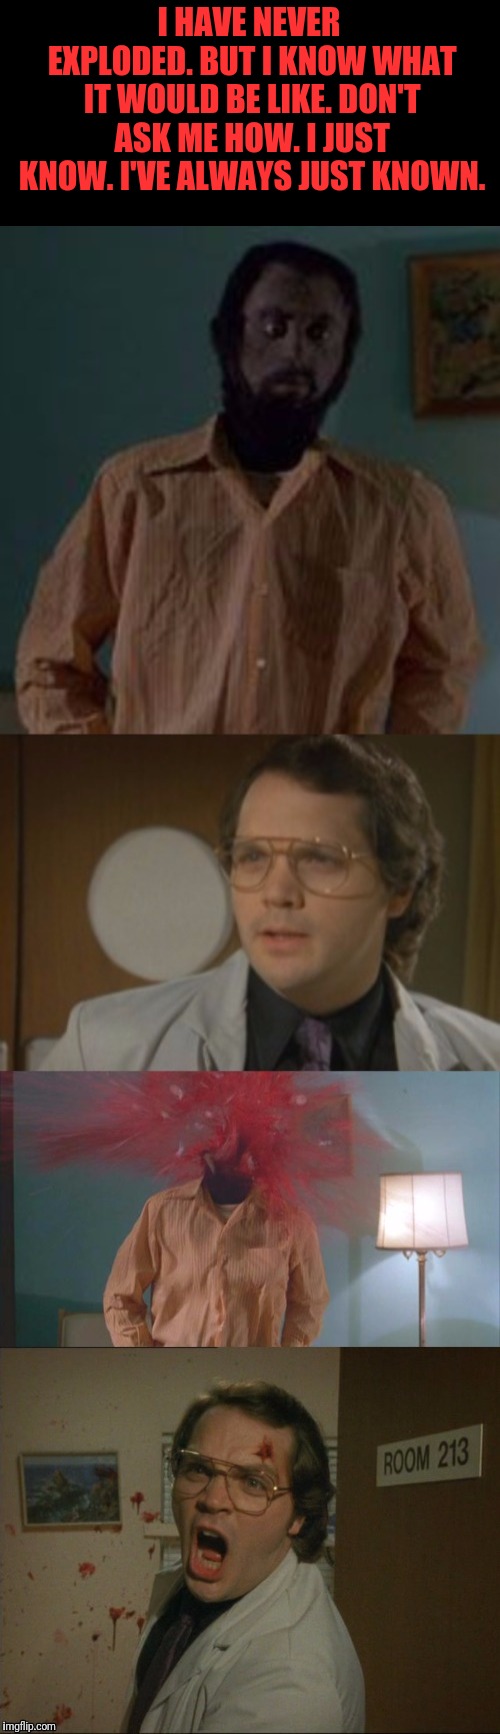 Garth Marenghi | I HAVE NEVER EXPLODED. BUT I KNOW WHAT IT WOULD BE LIKE. DON'T ASK ME HOW. I JUST KNOW. I'VE ALWAYS JUST KNOWN. | image tagged in giving,head,explosions | made w/ Imgflip meme maker